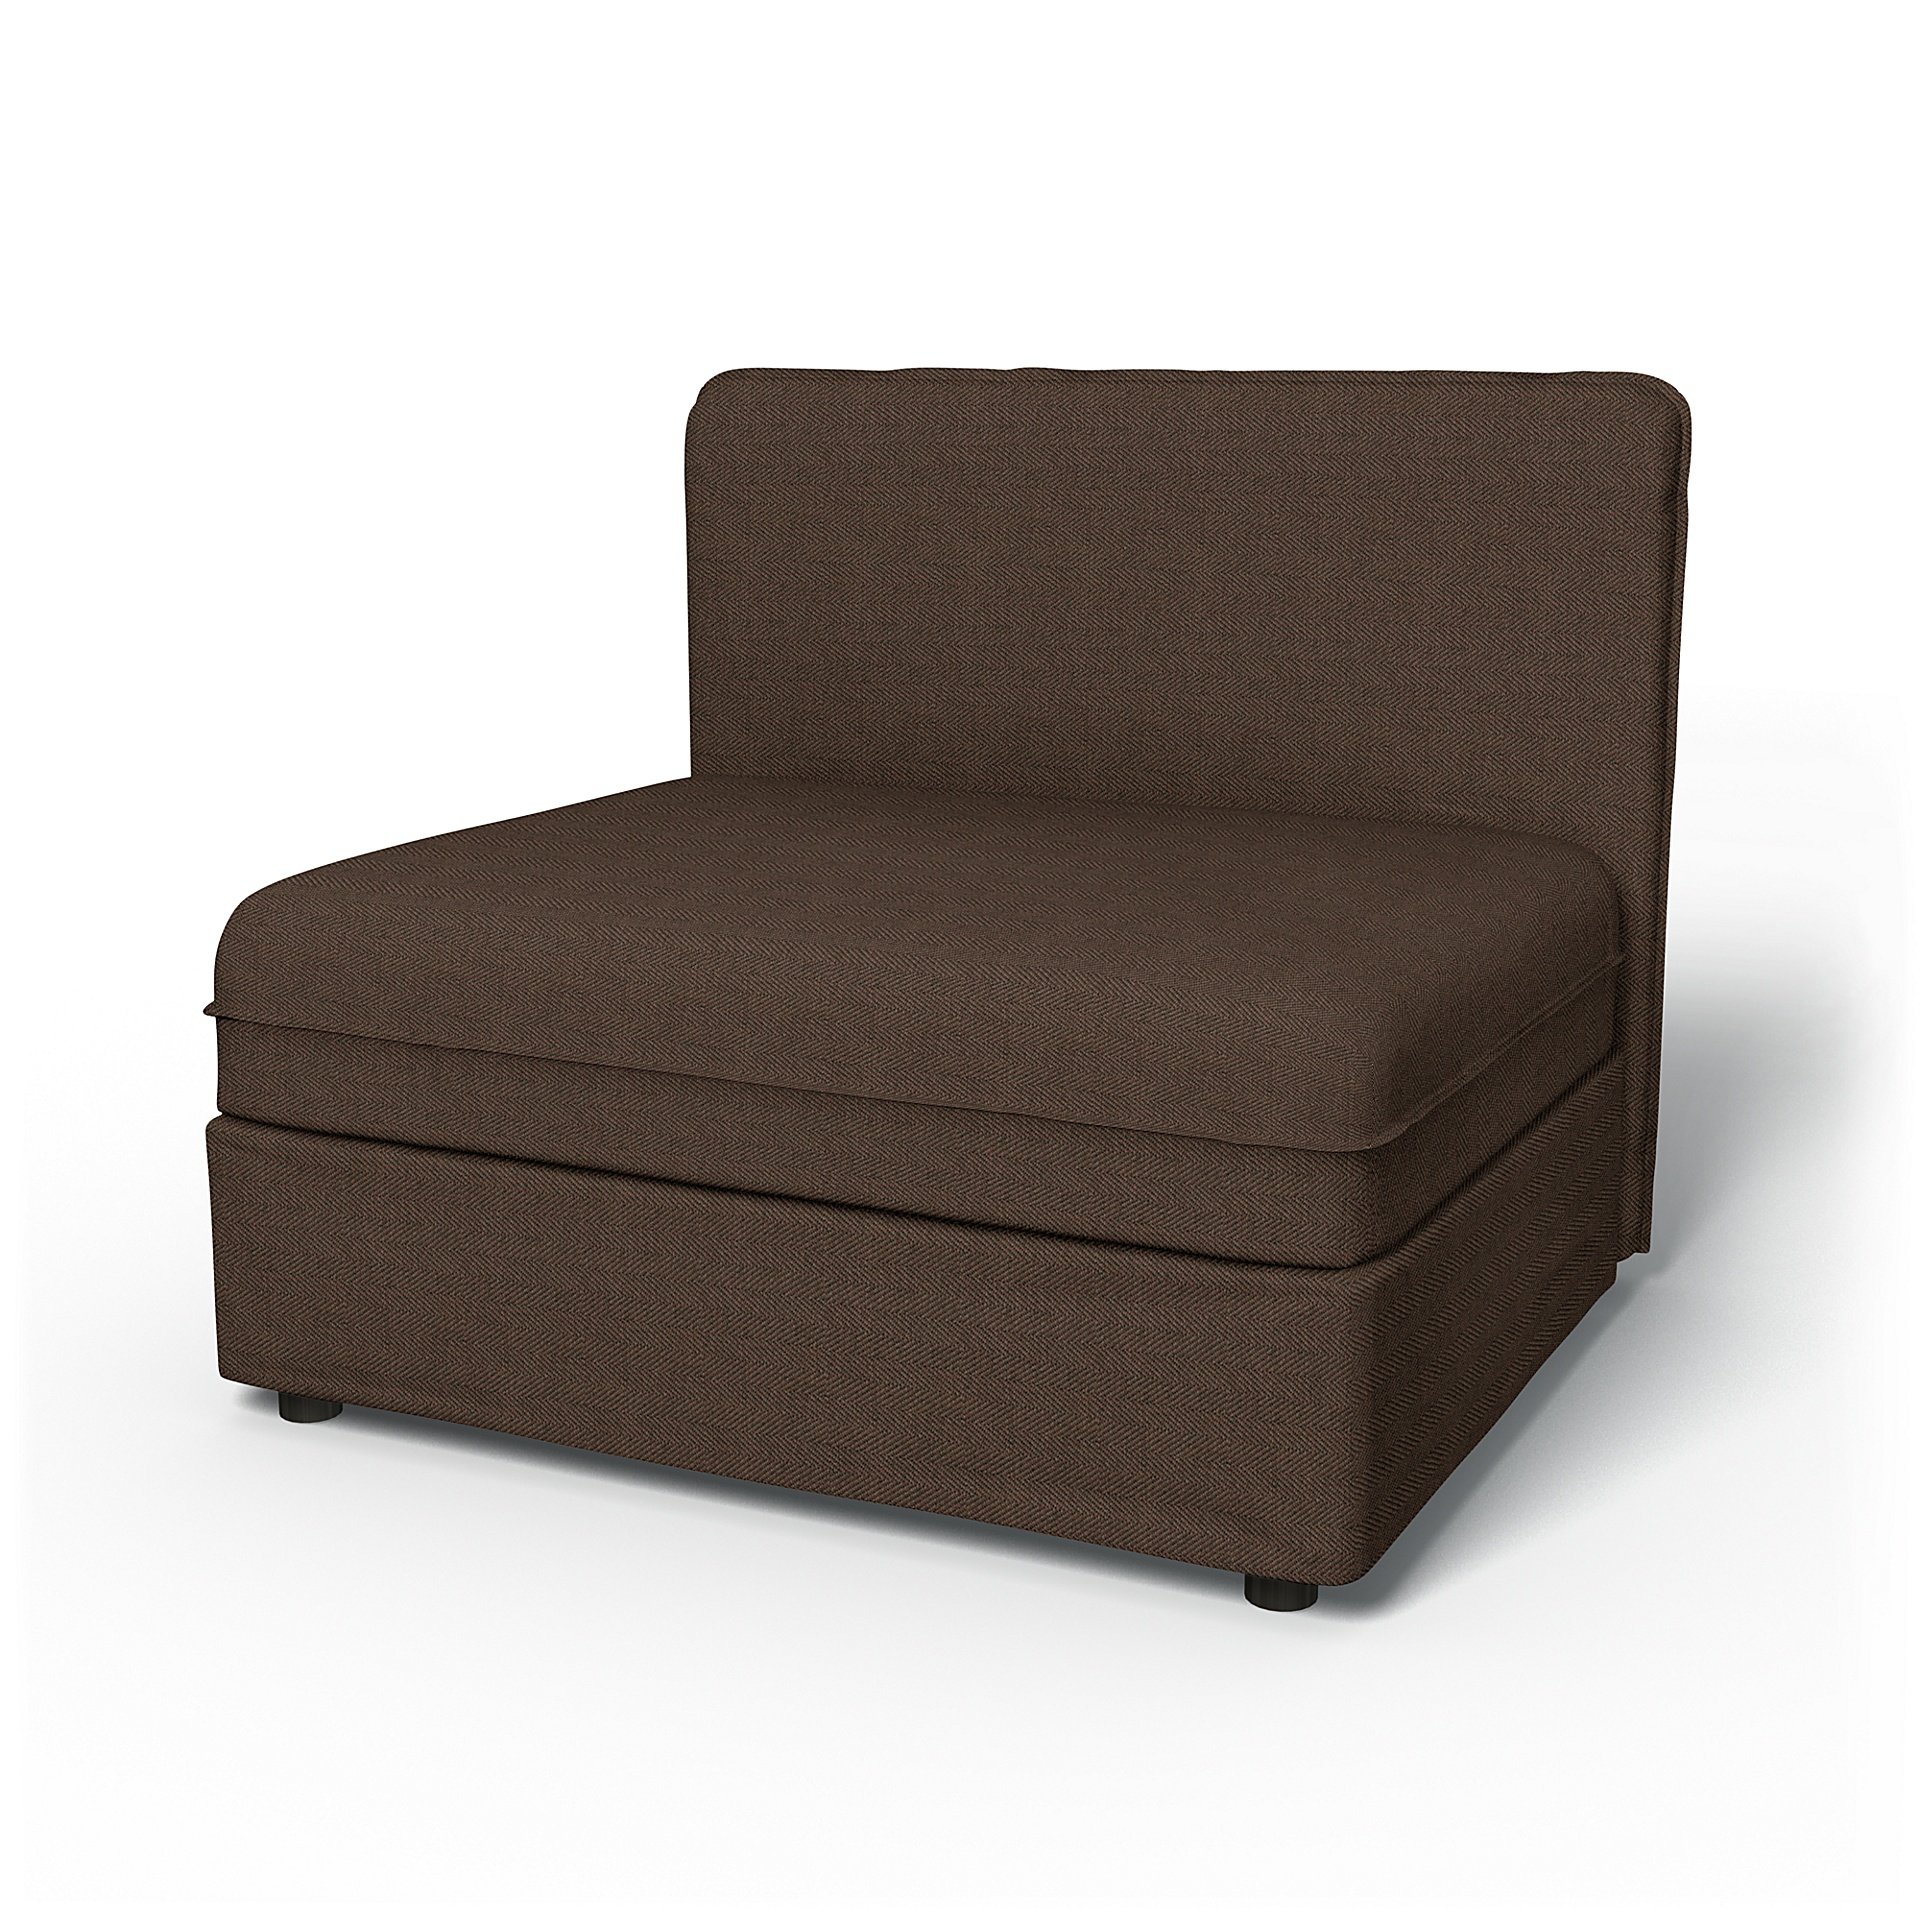 IKEA - Vallentuna Seat Module with Low Back Cover 100x80cm 39x32in, Chocolate, Boucle & Texture - Be